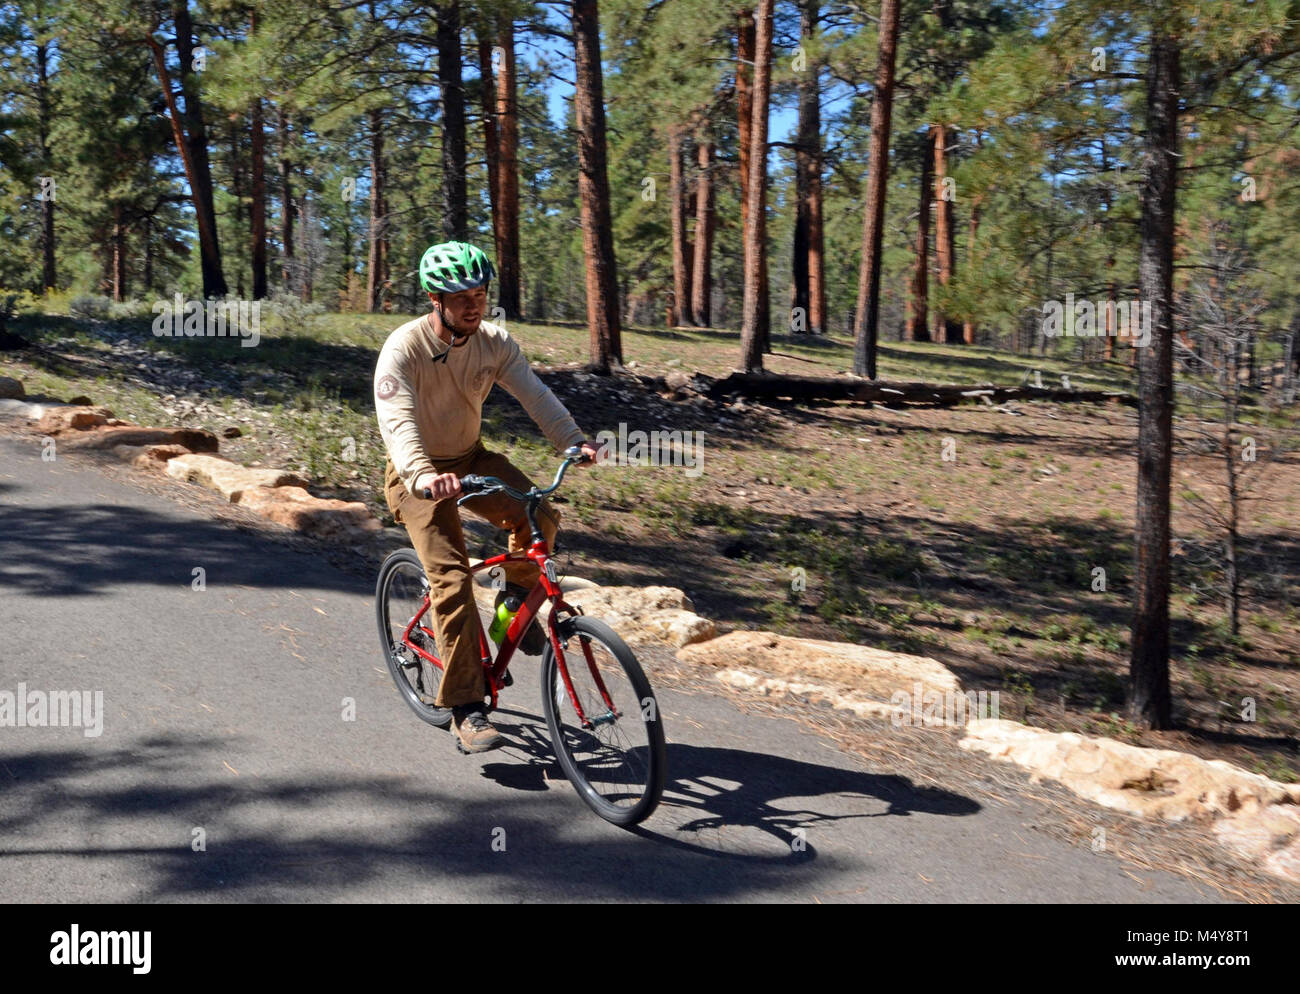 Bike Your Park Day (September 24, 2016) Dedication, Ribbon Cutting and inaugural ride of newly paved Tusayan to Grand Canyon Visitor Center Greenway Trail. Inaugural ride Tusayan Greenway Trail 3185e. Stock Photo